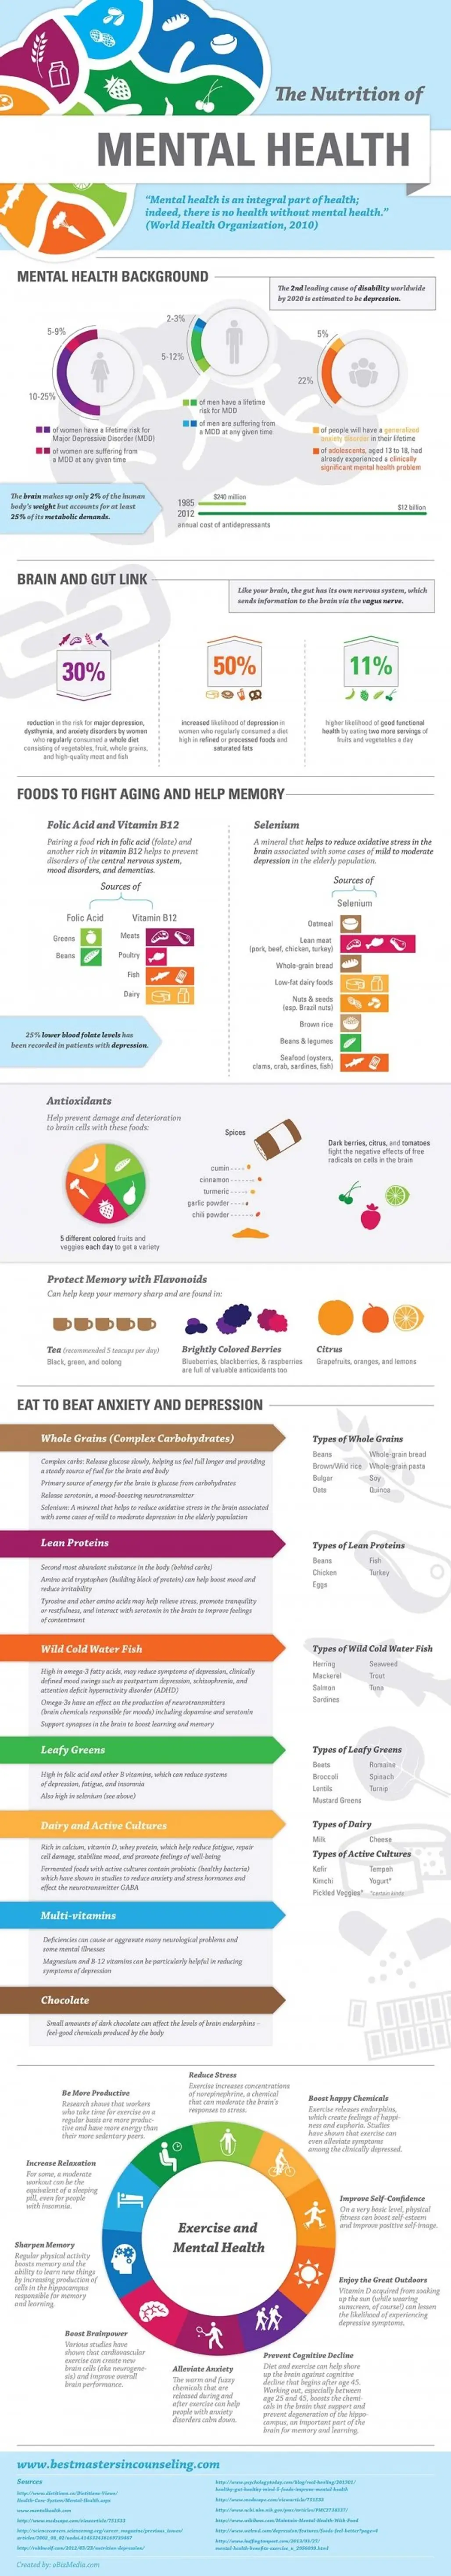 The Nutrition of Mental Health